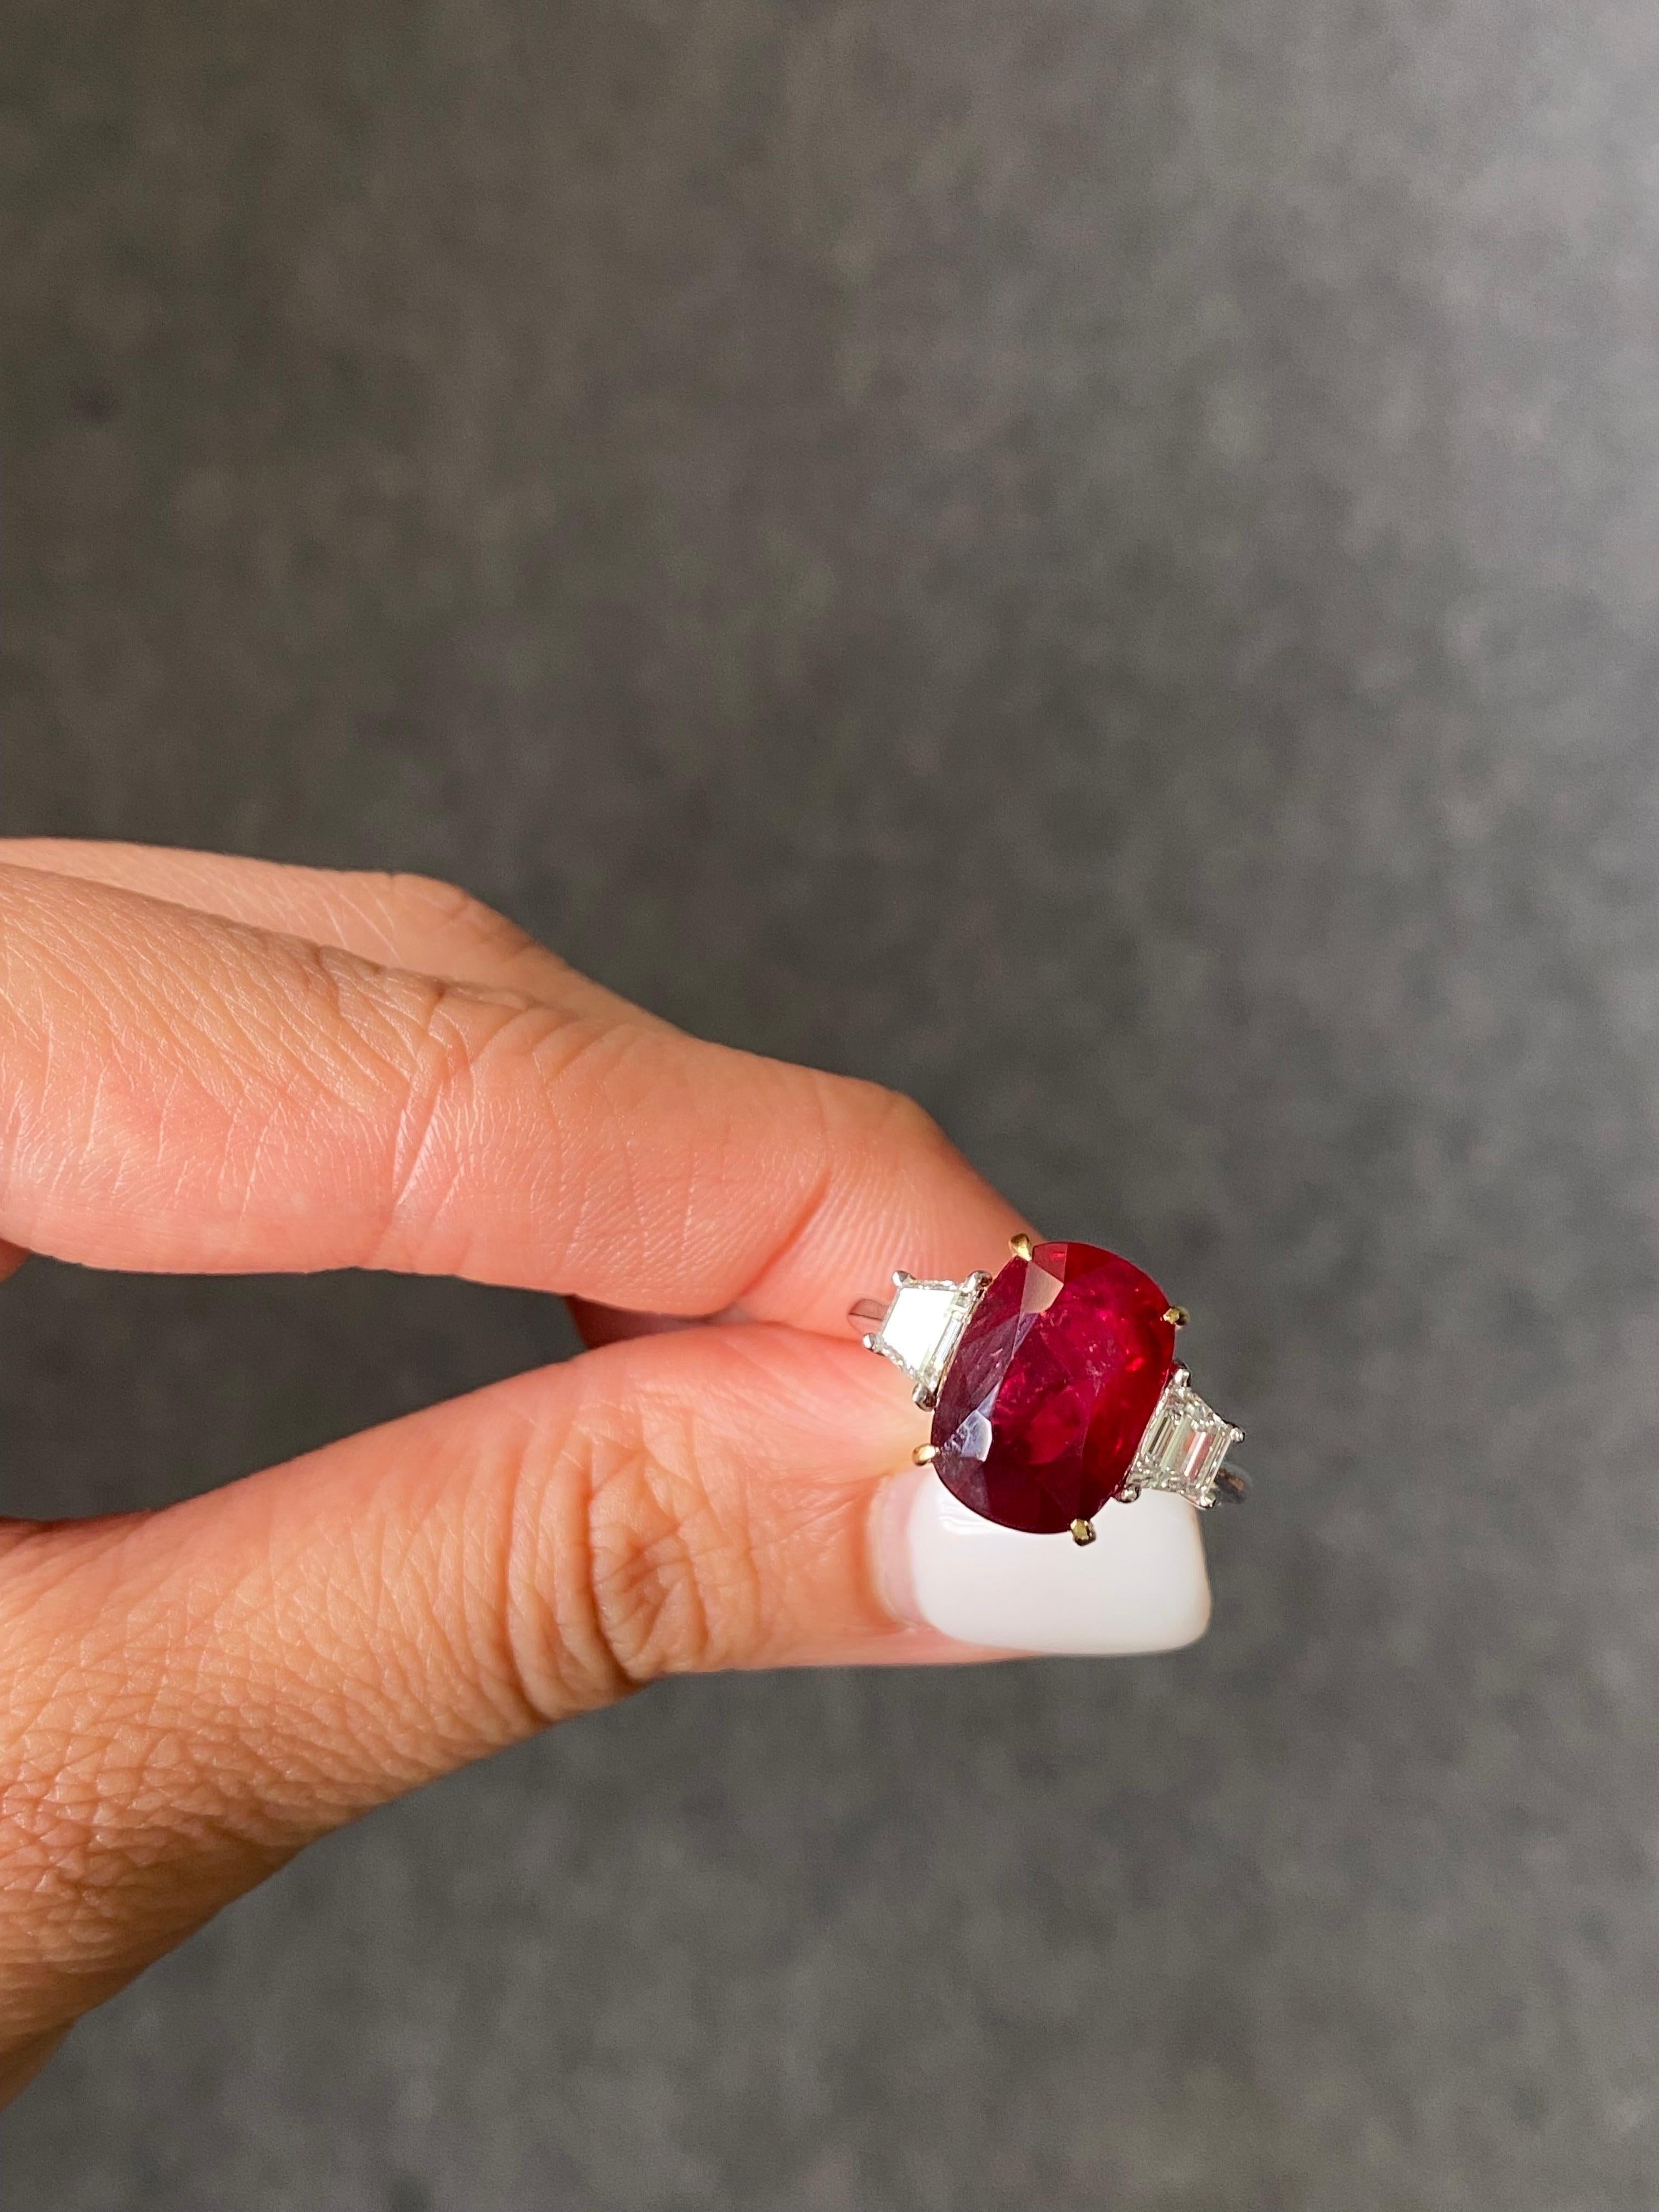 A classic 7.04 carat natural Ruby from Madagascar and 0.61 carat VS White Diamond three-stone engagement ring, set in solid 18K White Gold. The Ruby is transparent with a beautiful, vivid red, pigeon blood (as stated in the certificate). The ring is